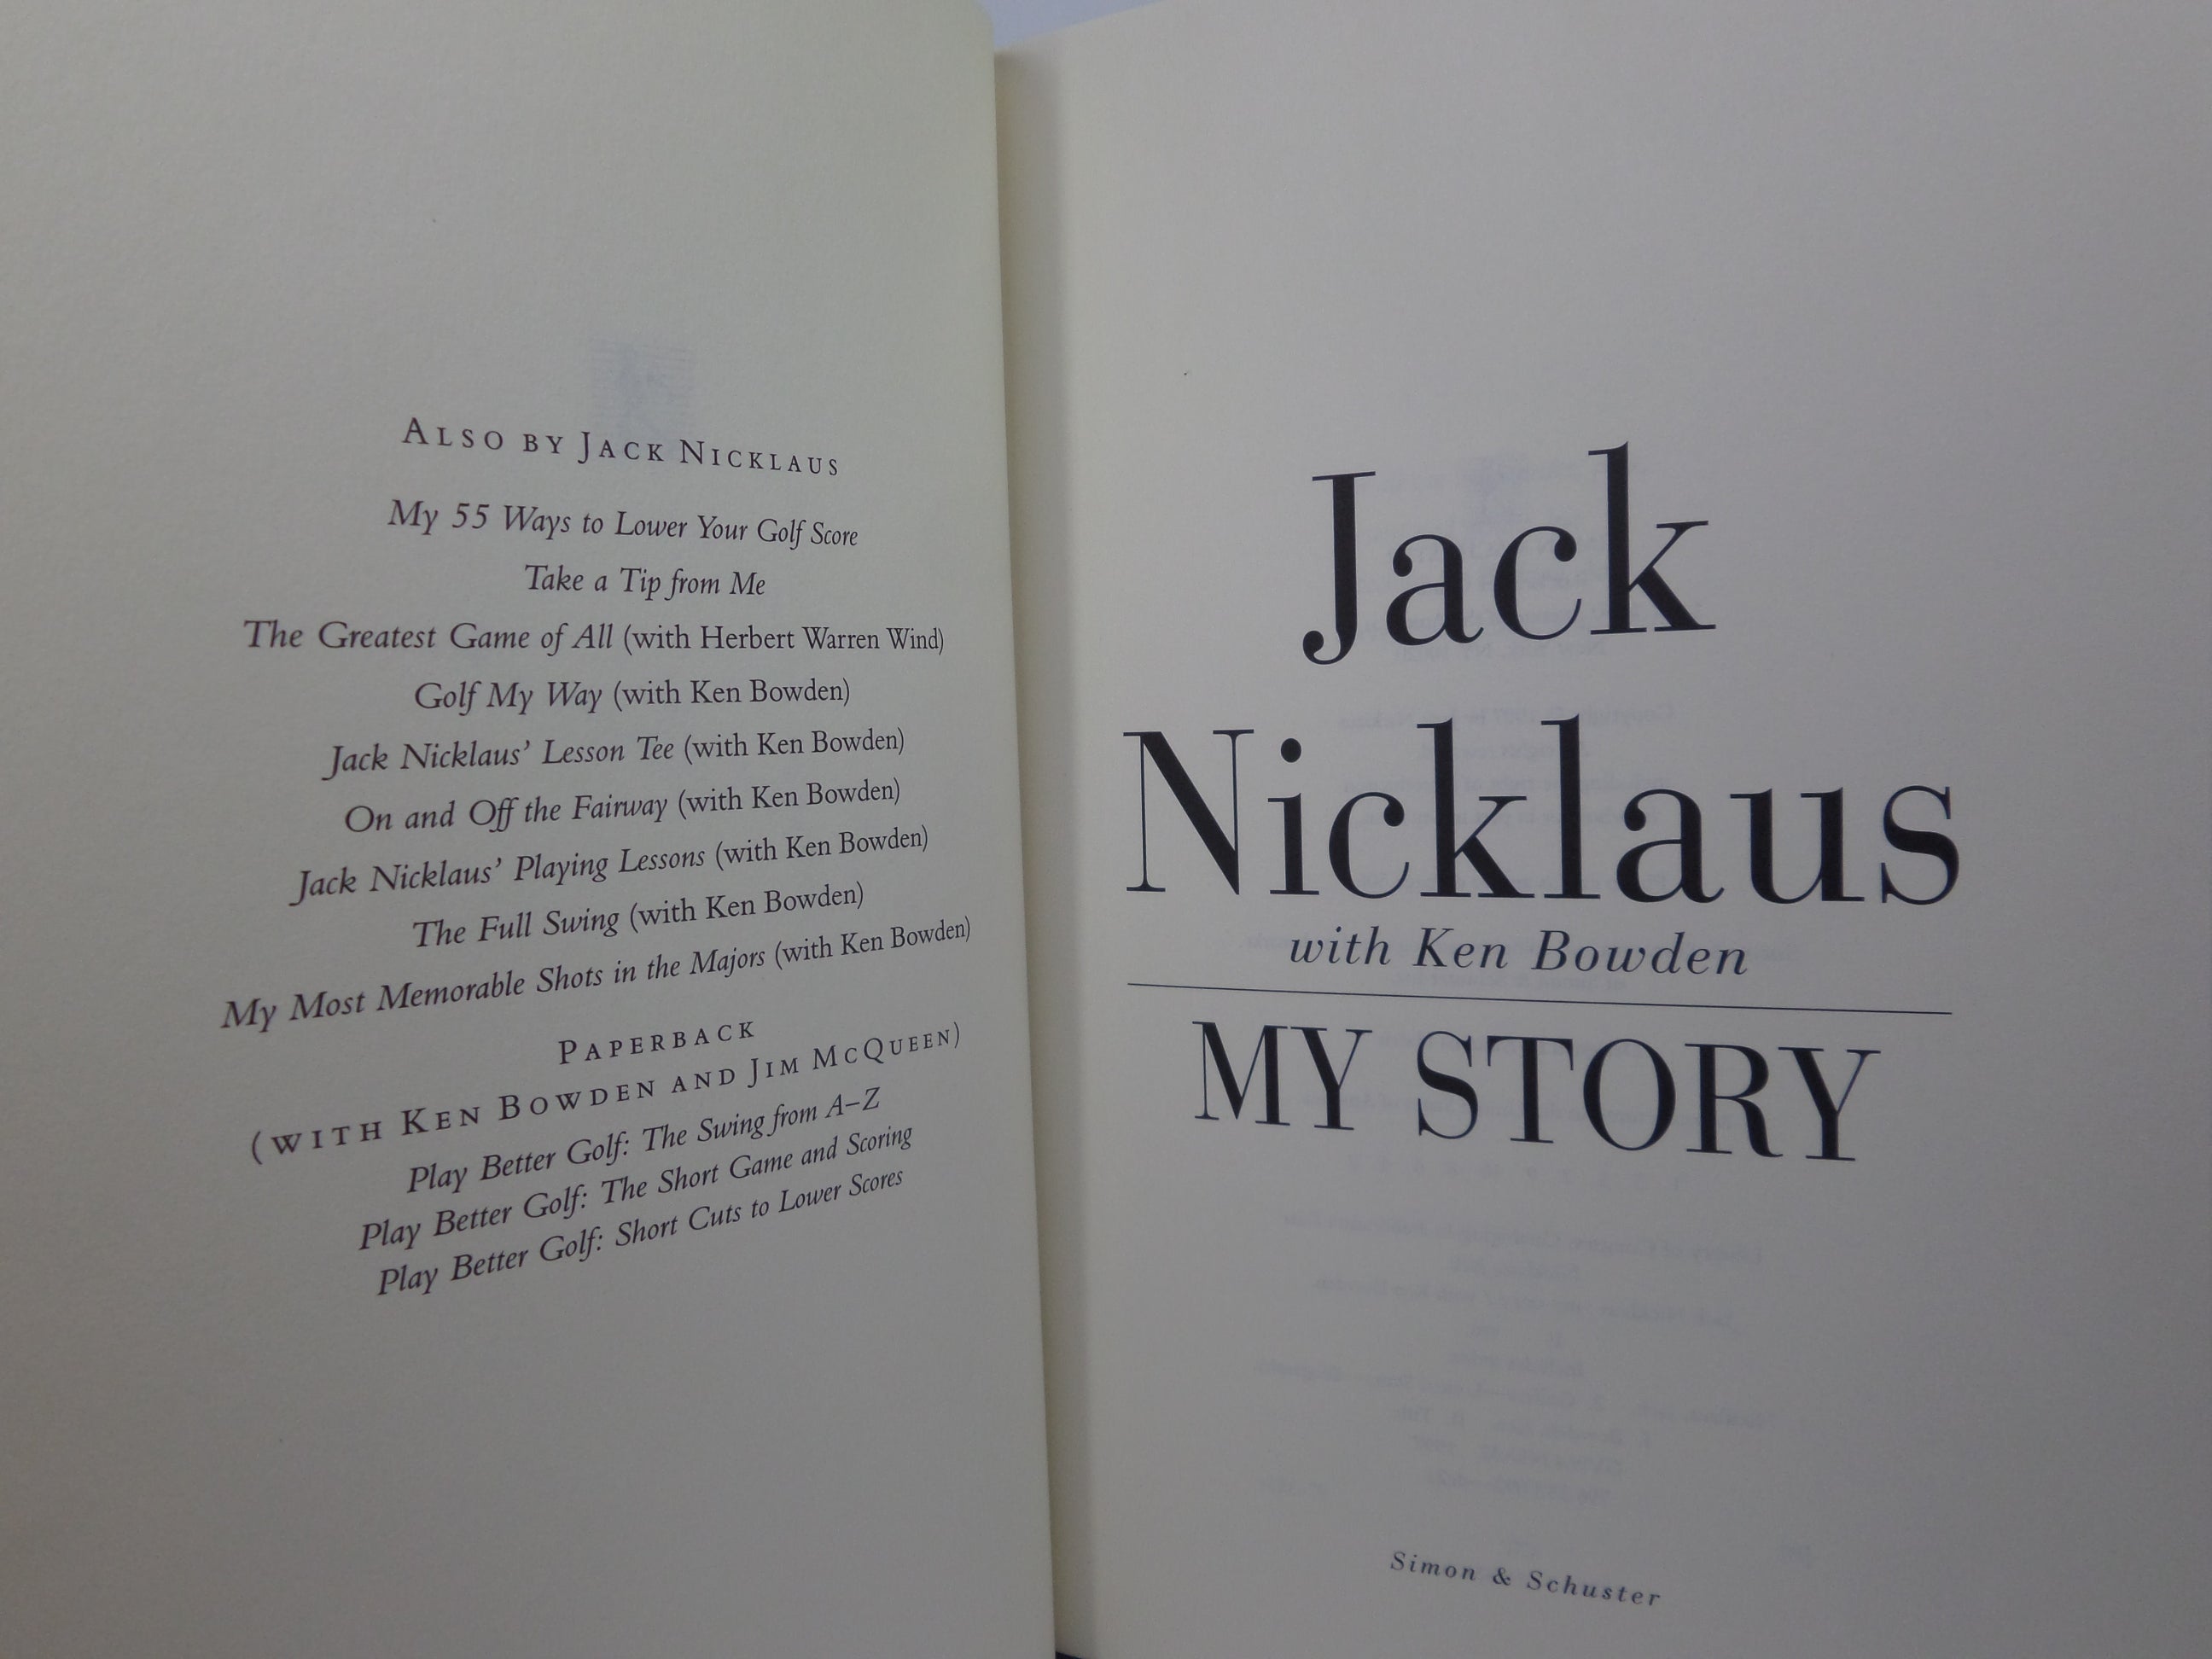 JACK NICKLAUS: MY STORY 1997 SIGNED FIRST EDITION